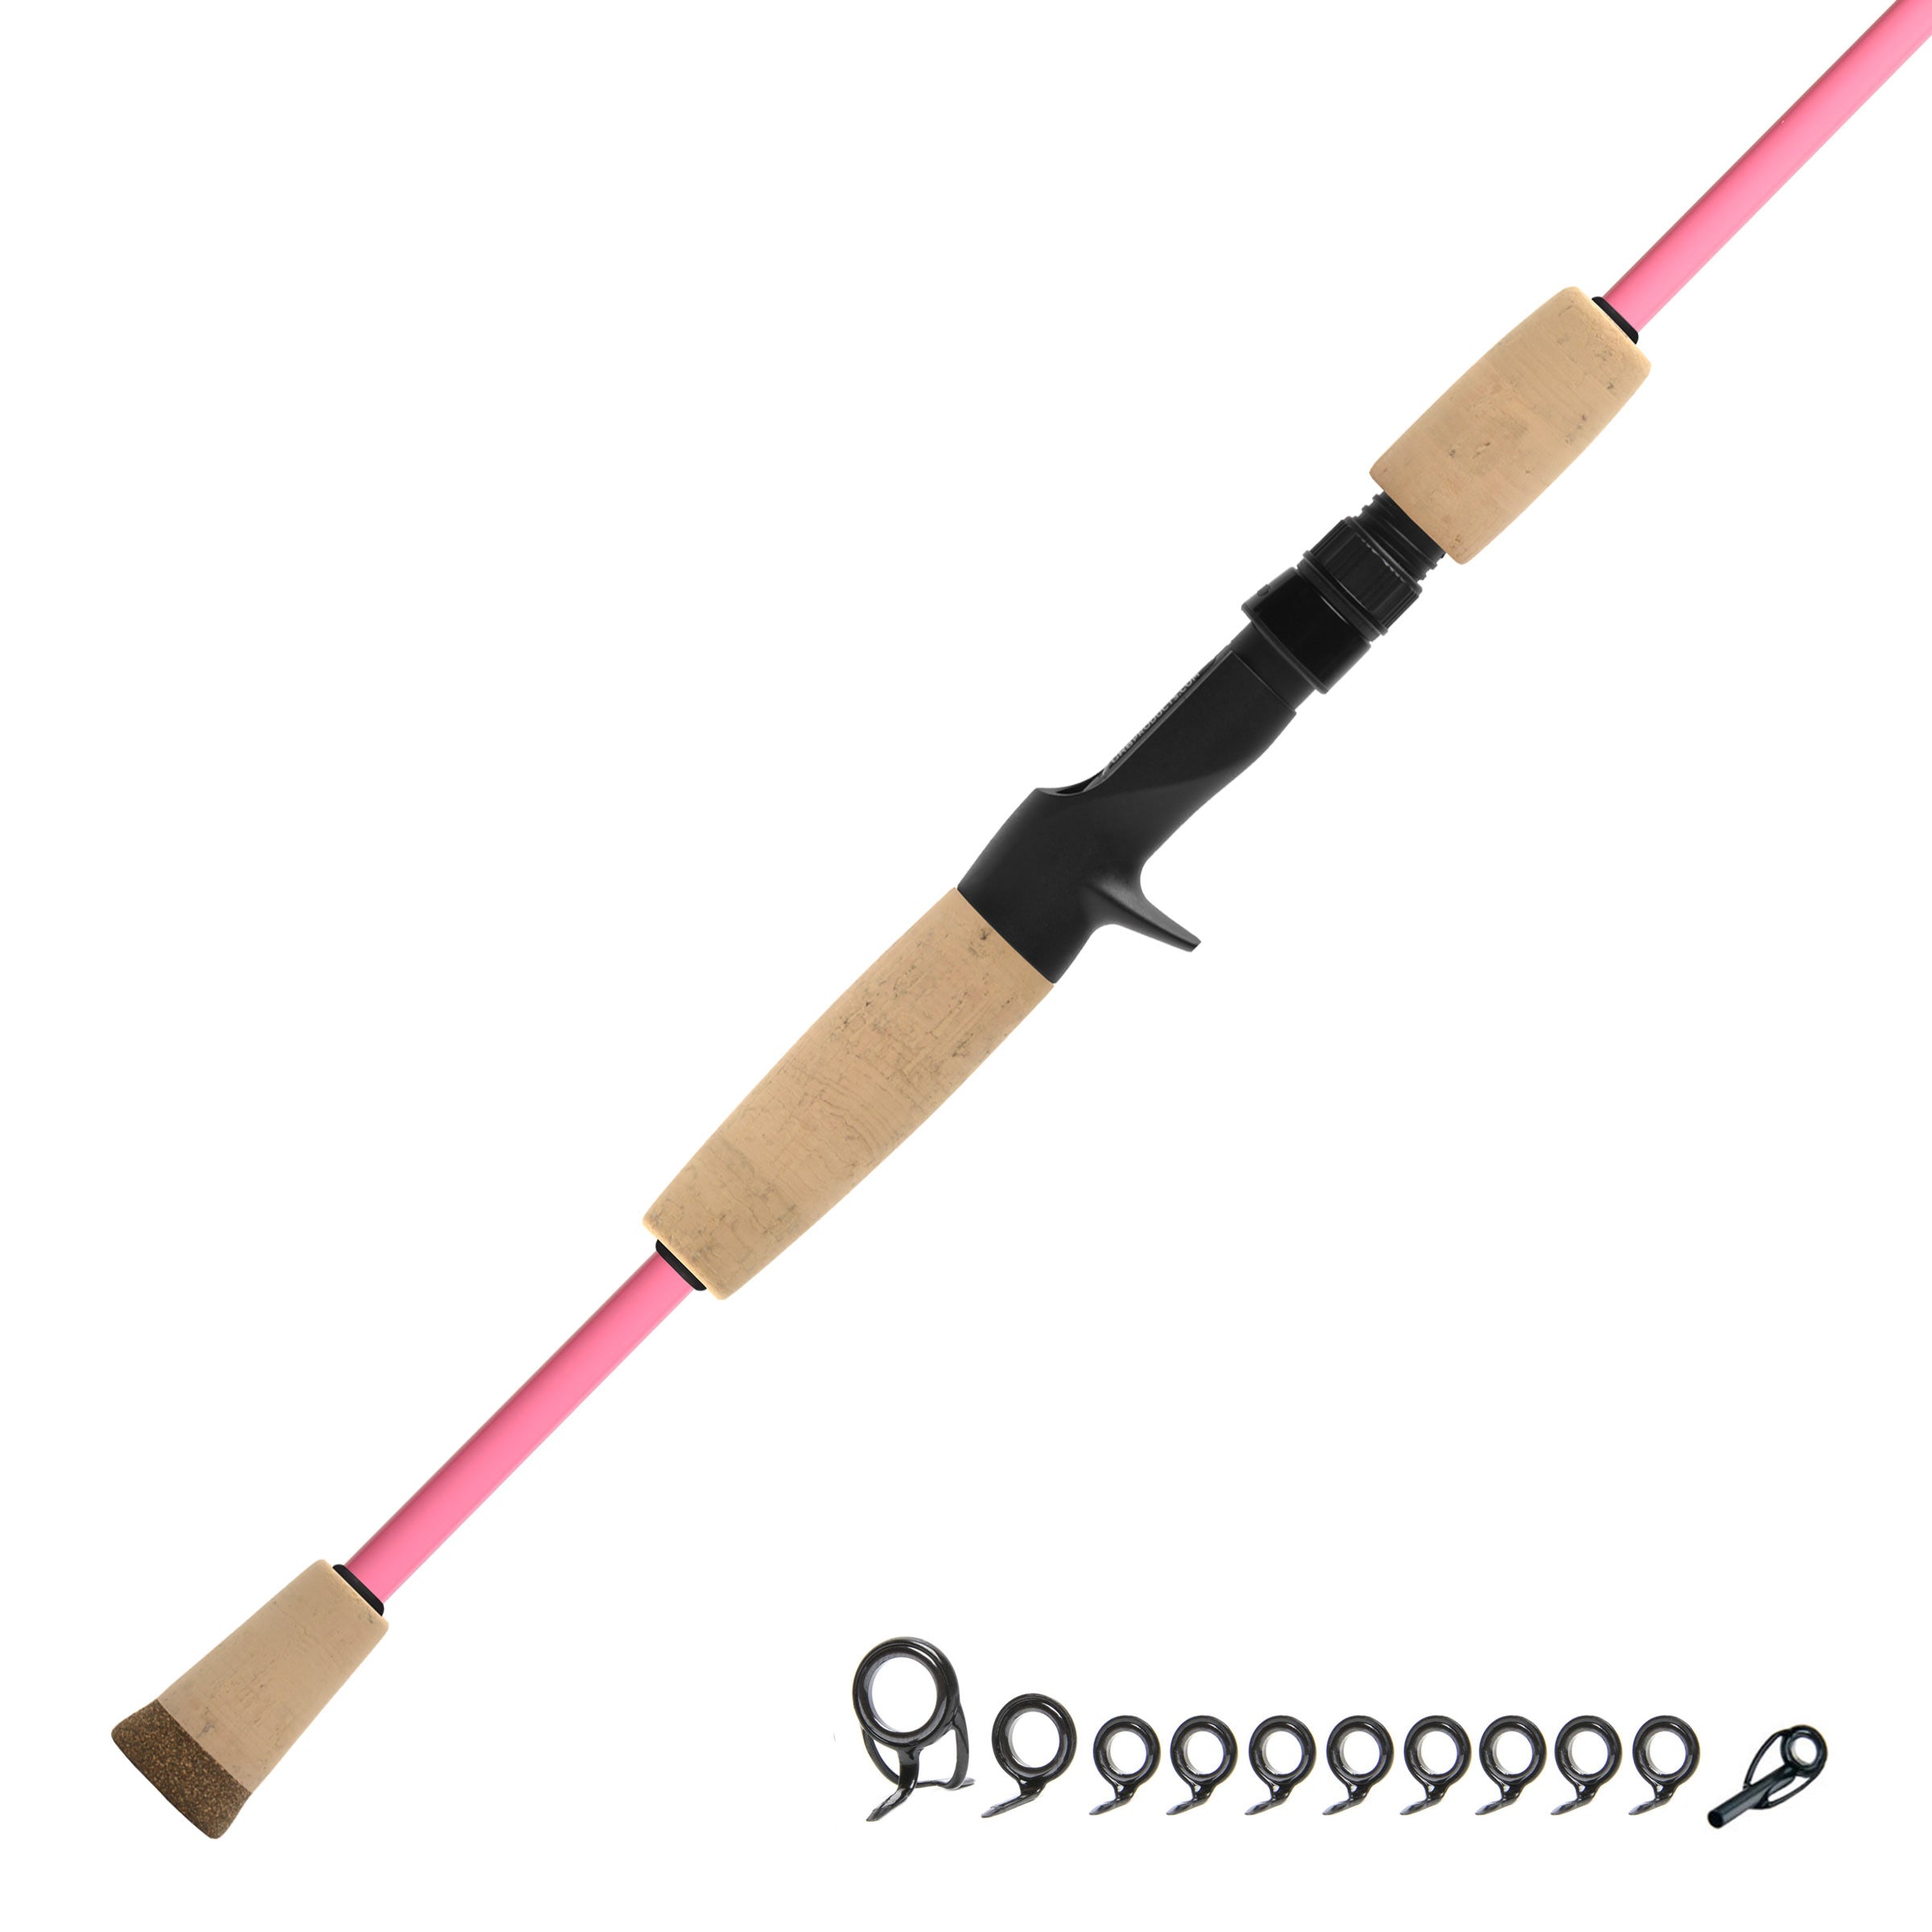 CRB 7'0 Med-Heavy Casting Rod Kit IS701MH